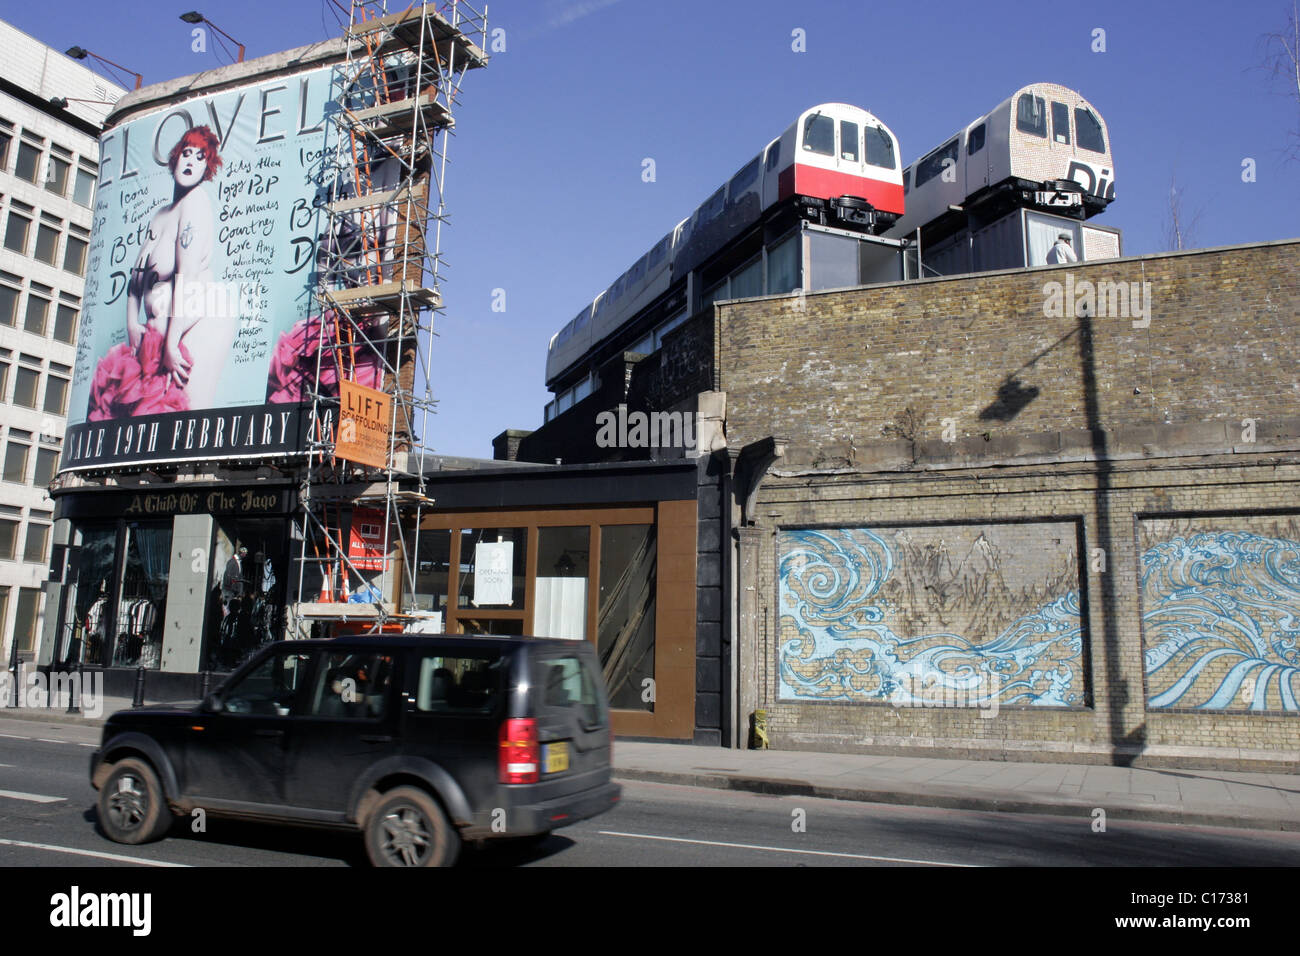 Beth Ditto Huge billboards advertising launch of new style magazine,'LOVE' appear in Shoreditch, East London. Conde Nast are Stock Photo